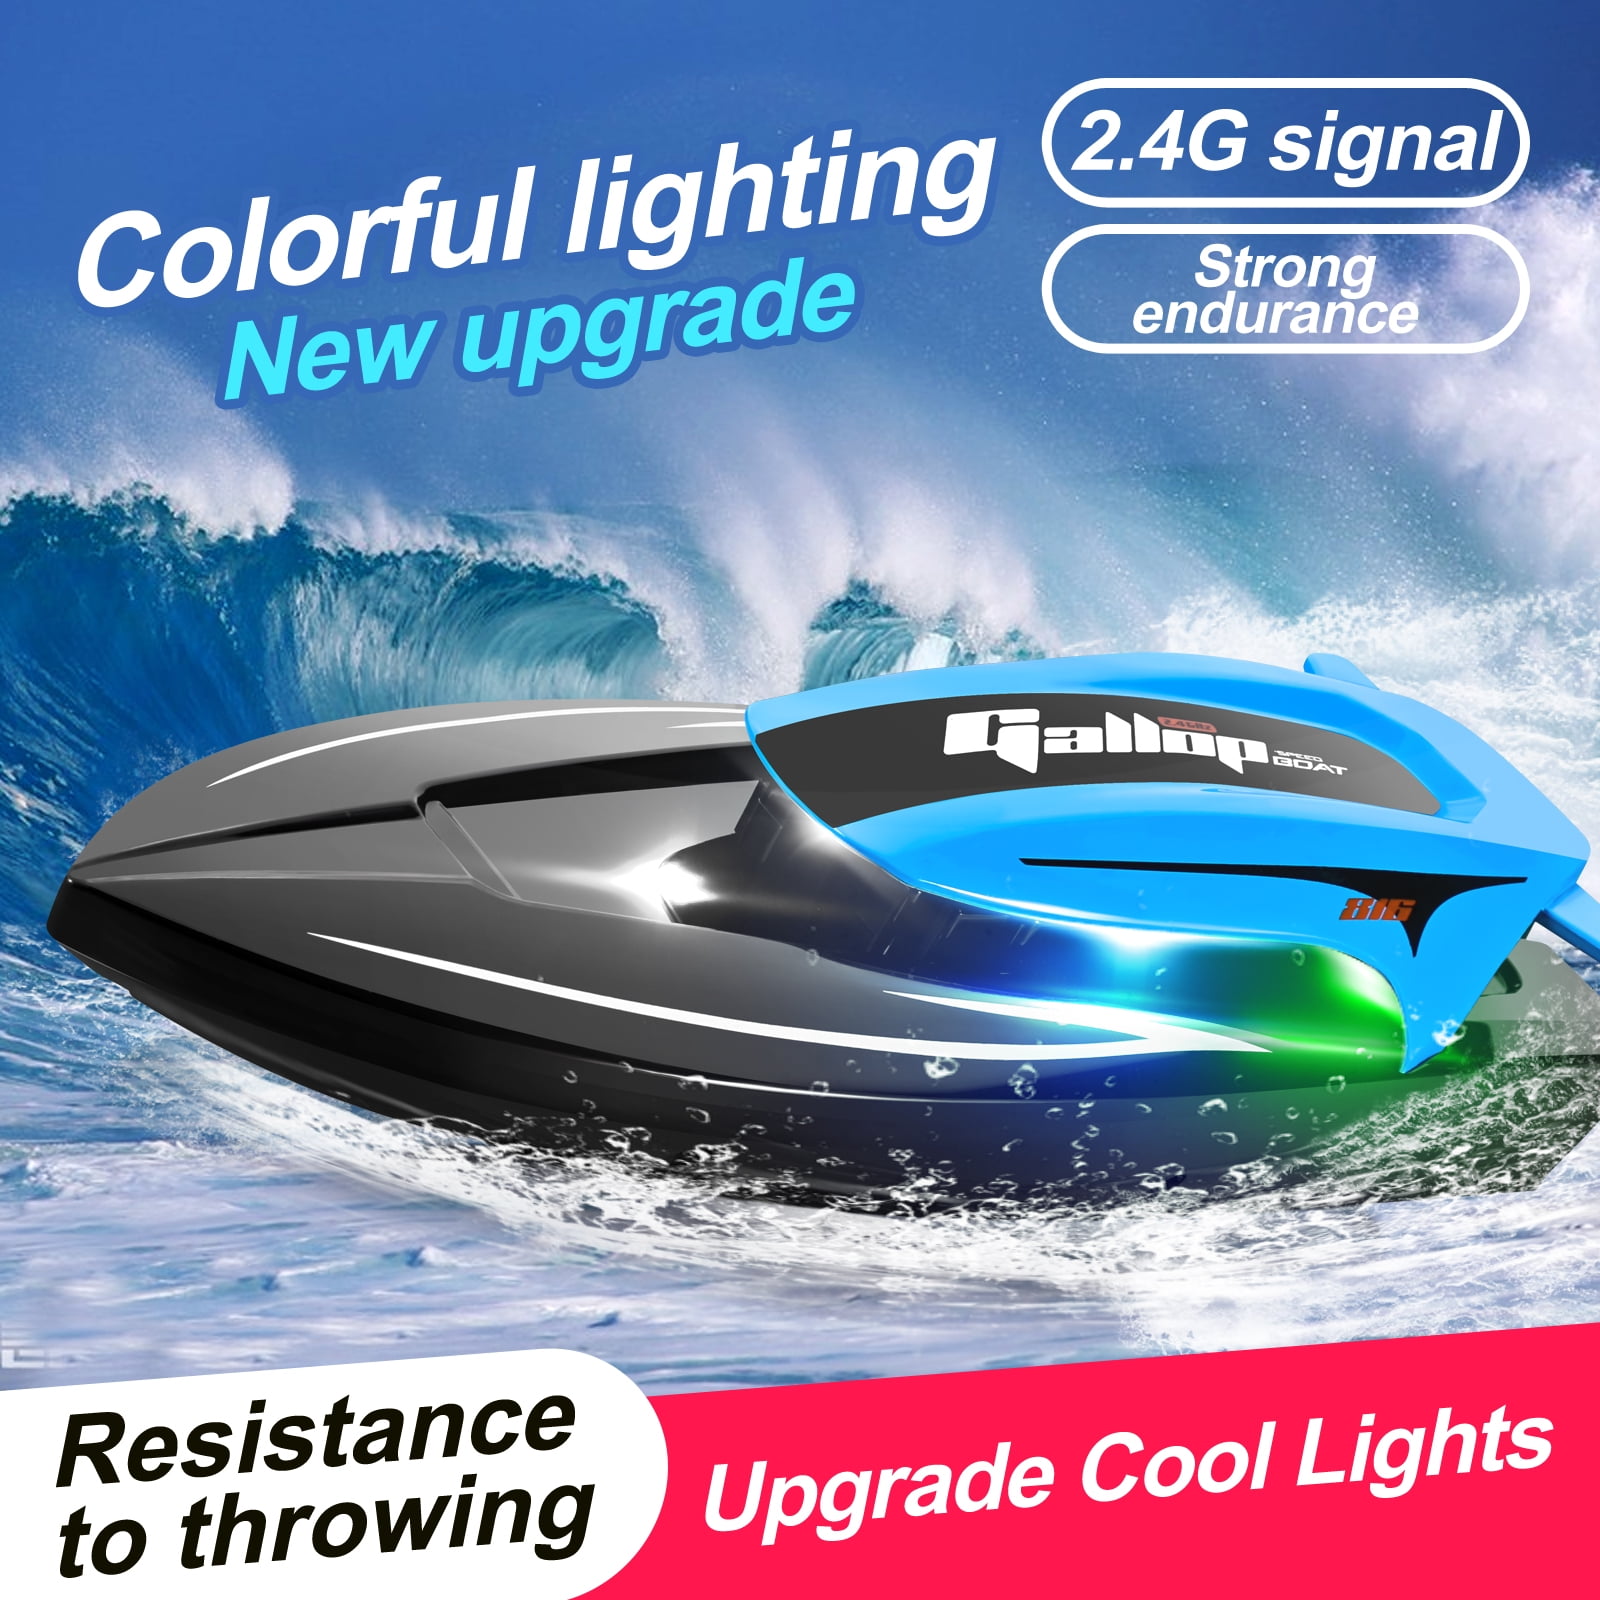 1pc High Speed Remote Control Boat With Led Light, 70+km/h Rc Boat